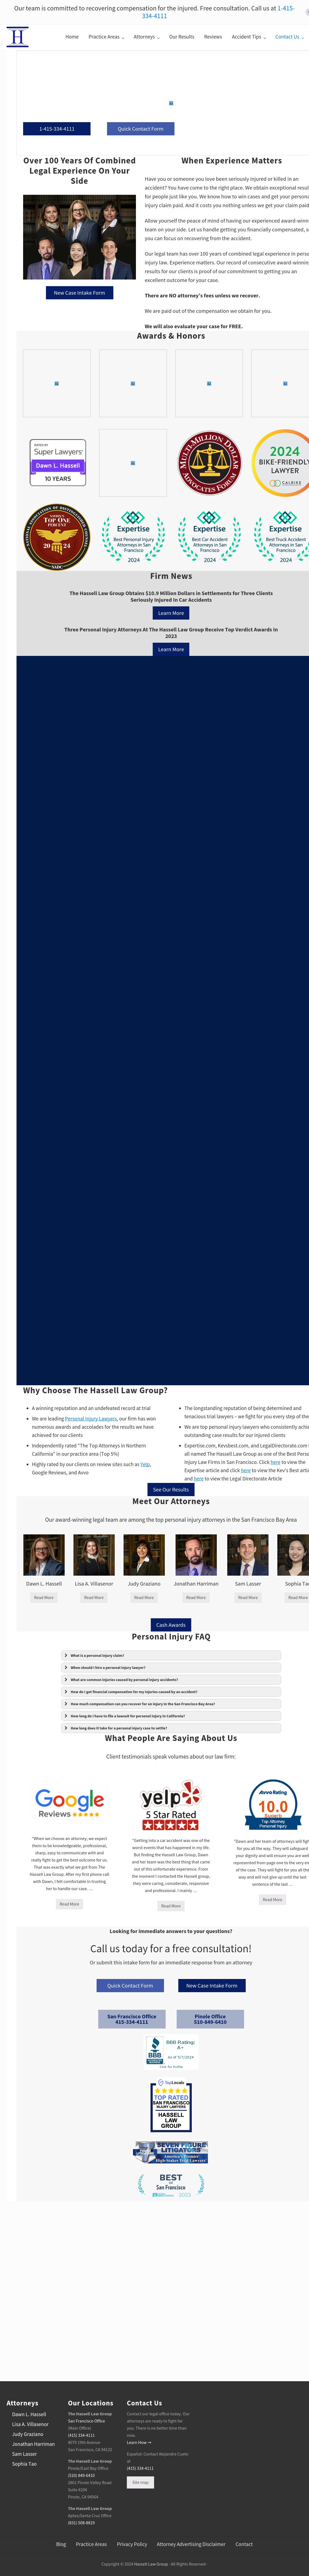 The Hassell Law Group - San Francisco CA Lawyers